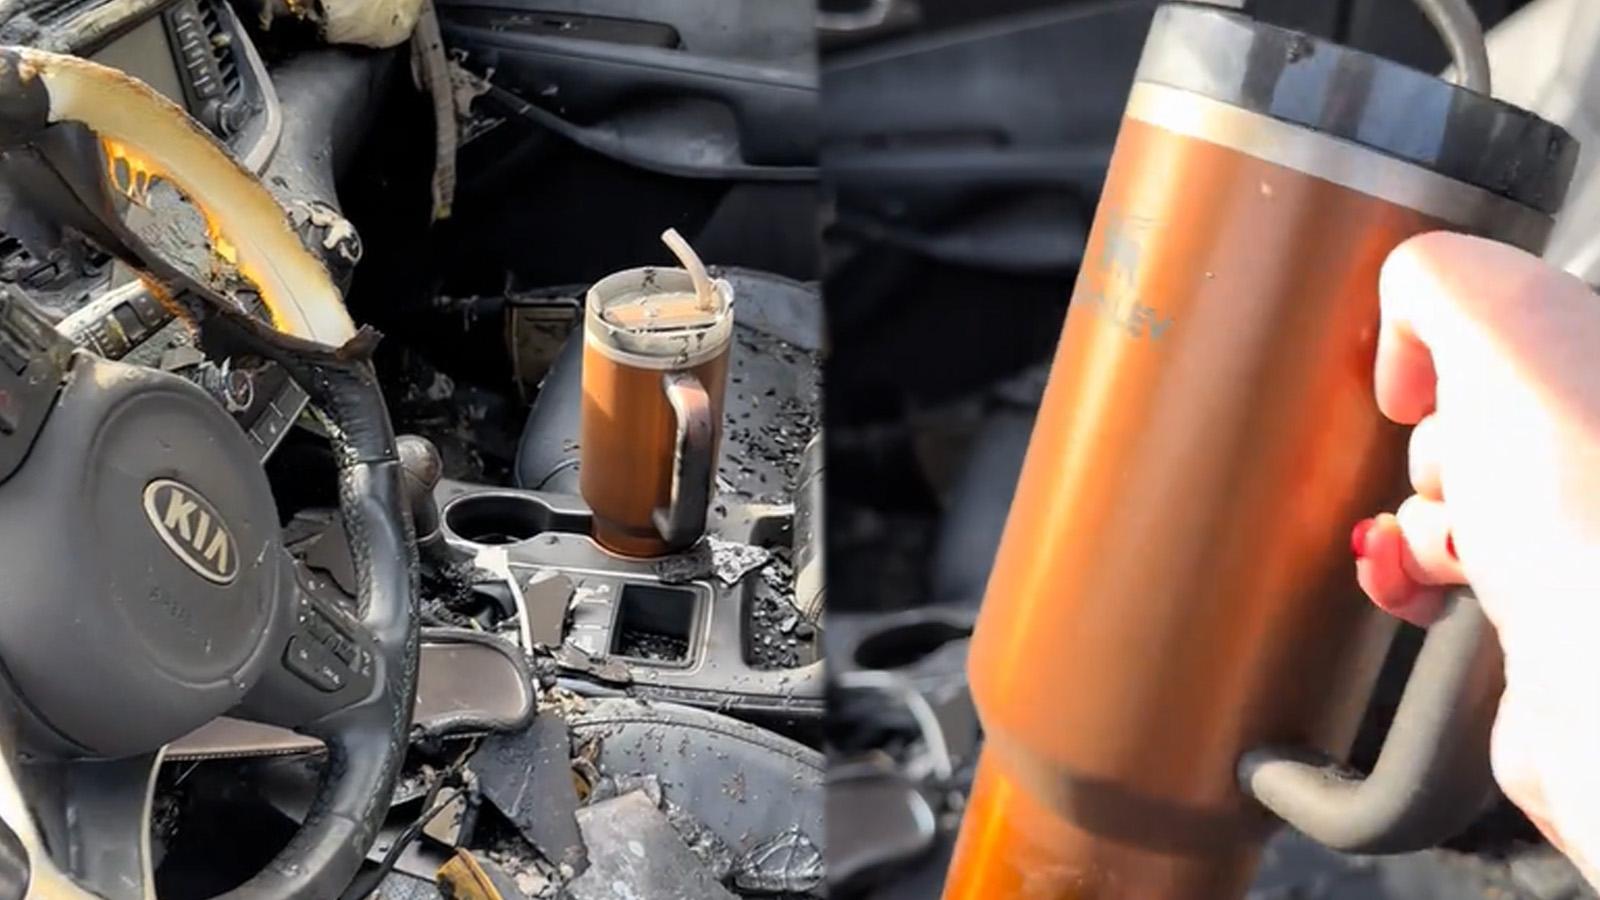 Stanley offers to replace woman's car after fire leaves brand's tumbler untouched